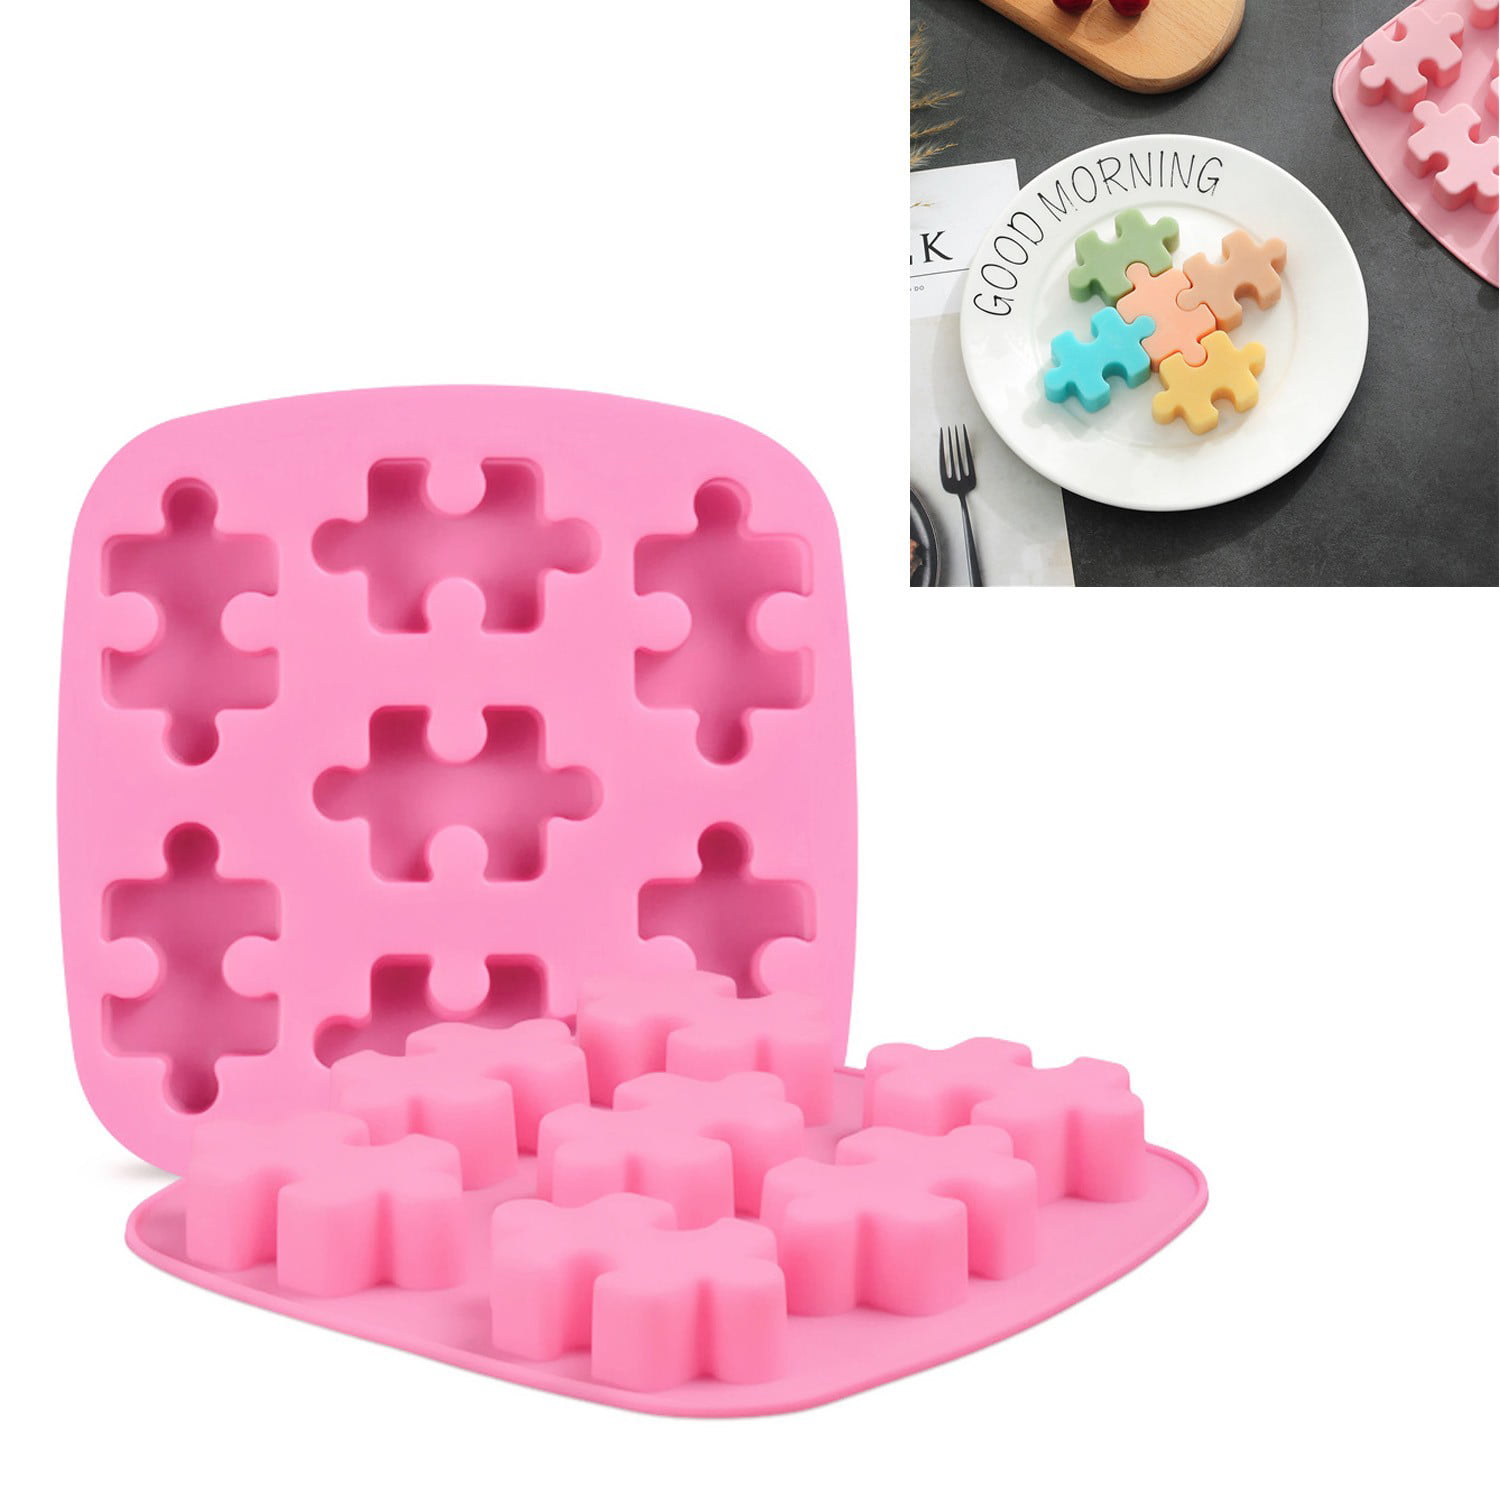 3D Silicone Fondant Cake Mold Candy Cookie Chocolate Soap Decoration Baking Mold 